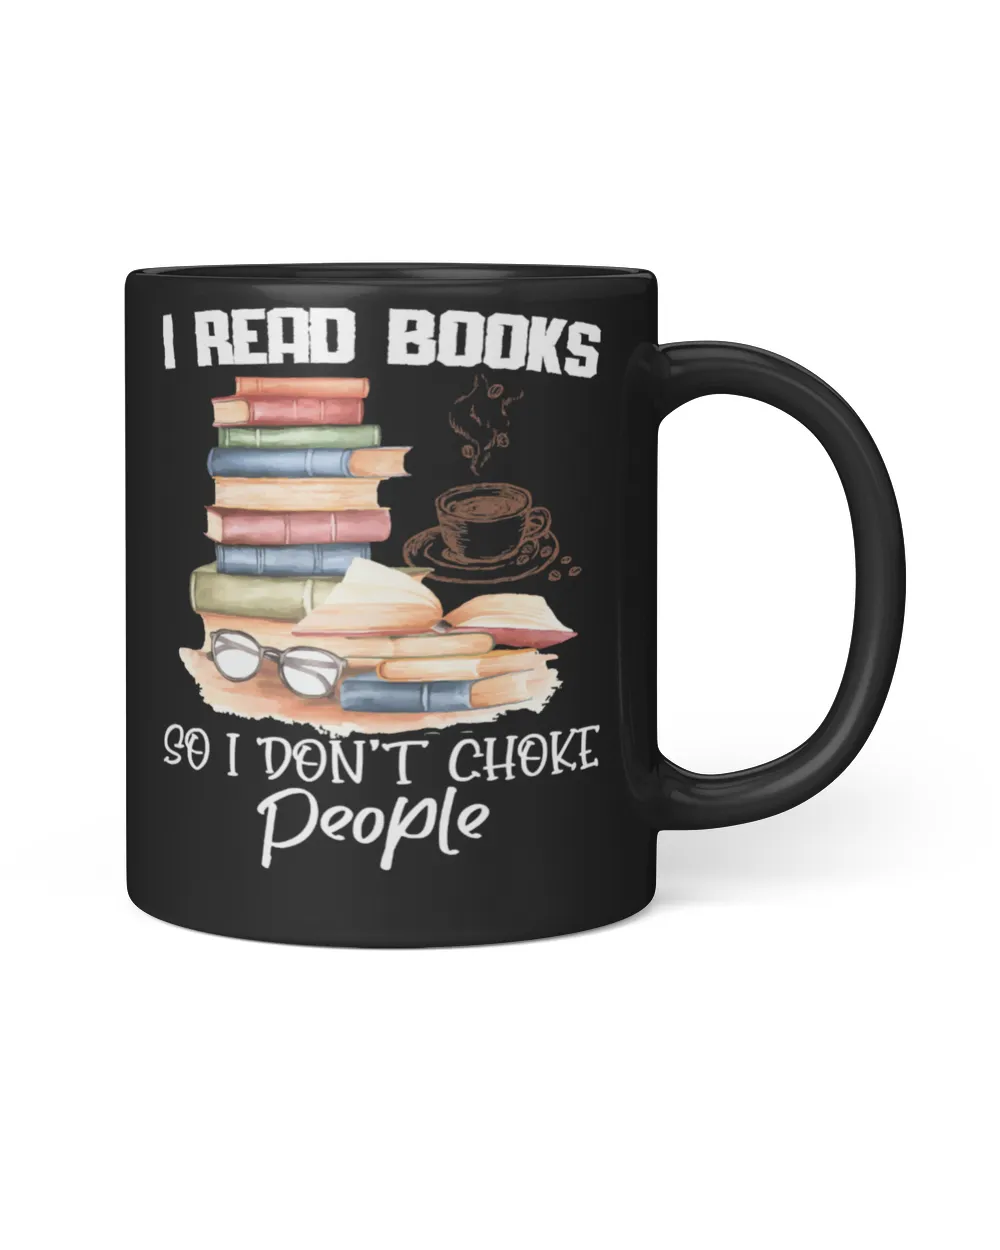 Book Reader I Read Books So I Dont Choke People 245 Reading Library